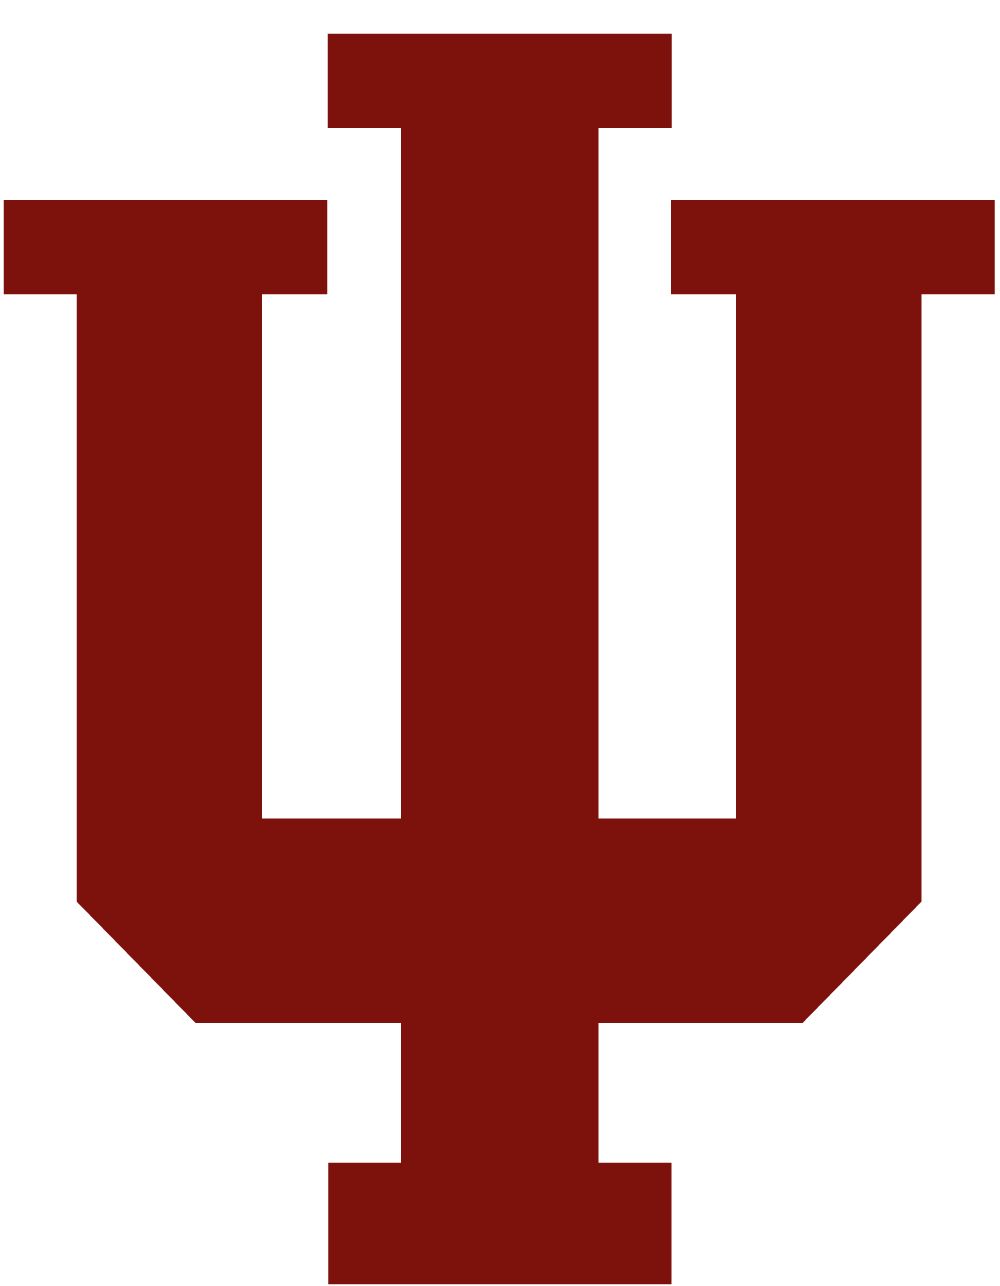 IU College Logo - New Frontiers grants in the Arts and Humanities awarded to IU